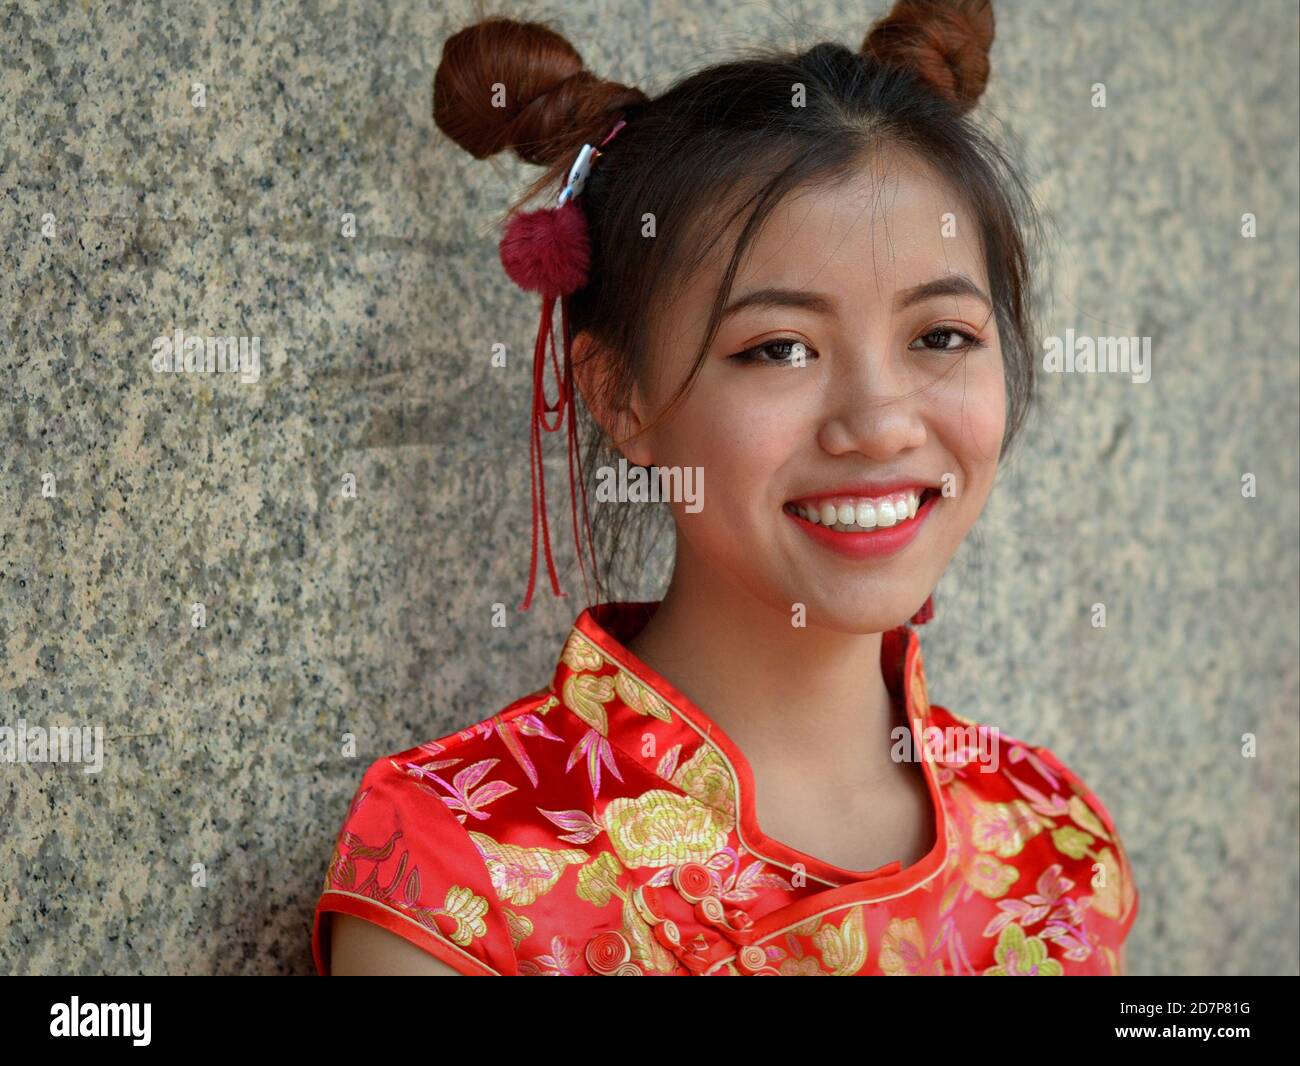 Young Thai Chinese beauty with traditional Chinese double side buns  wears a red-and-gold Chinese silk dress (cheongsam) and smiles for the camera. Stock Photo